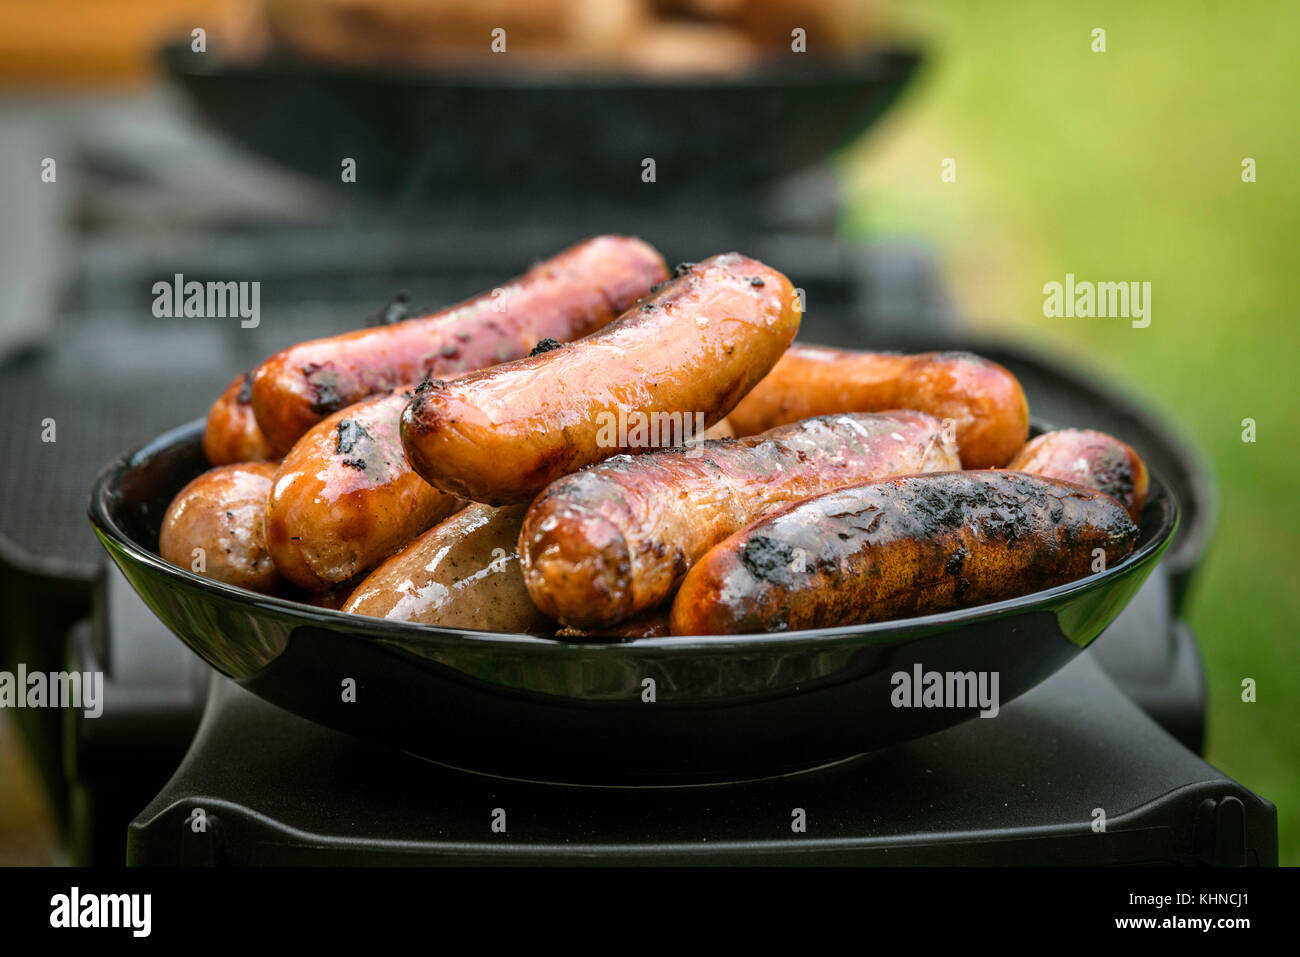 Grilled sausages on a plate at an outdoor barbecue kitchen with a stack of wieners Stock Photo